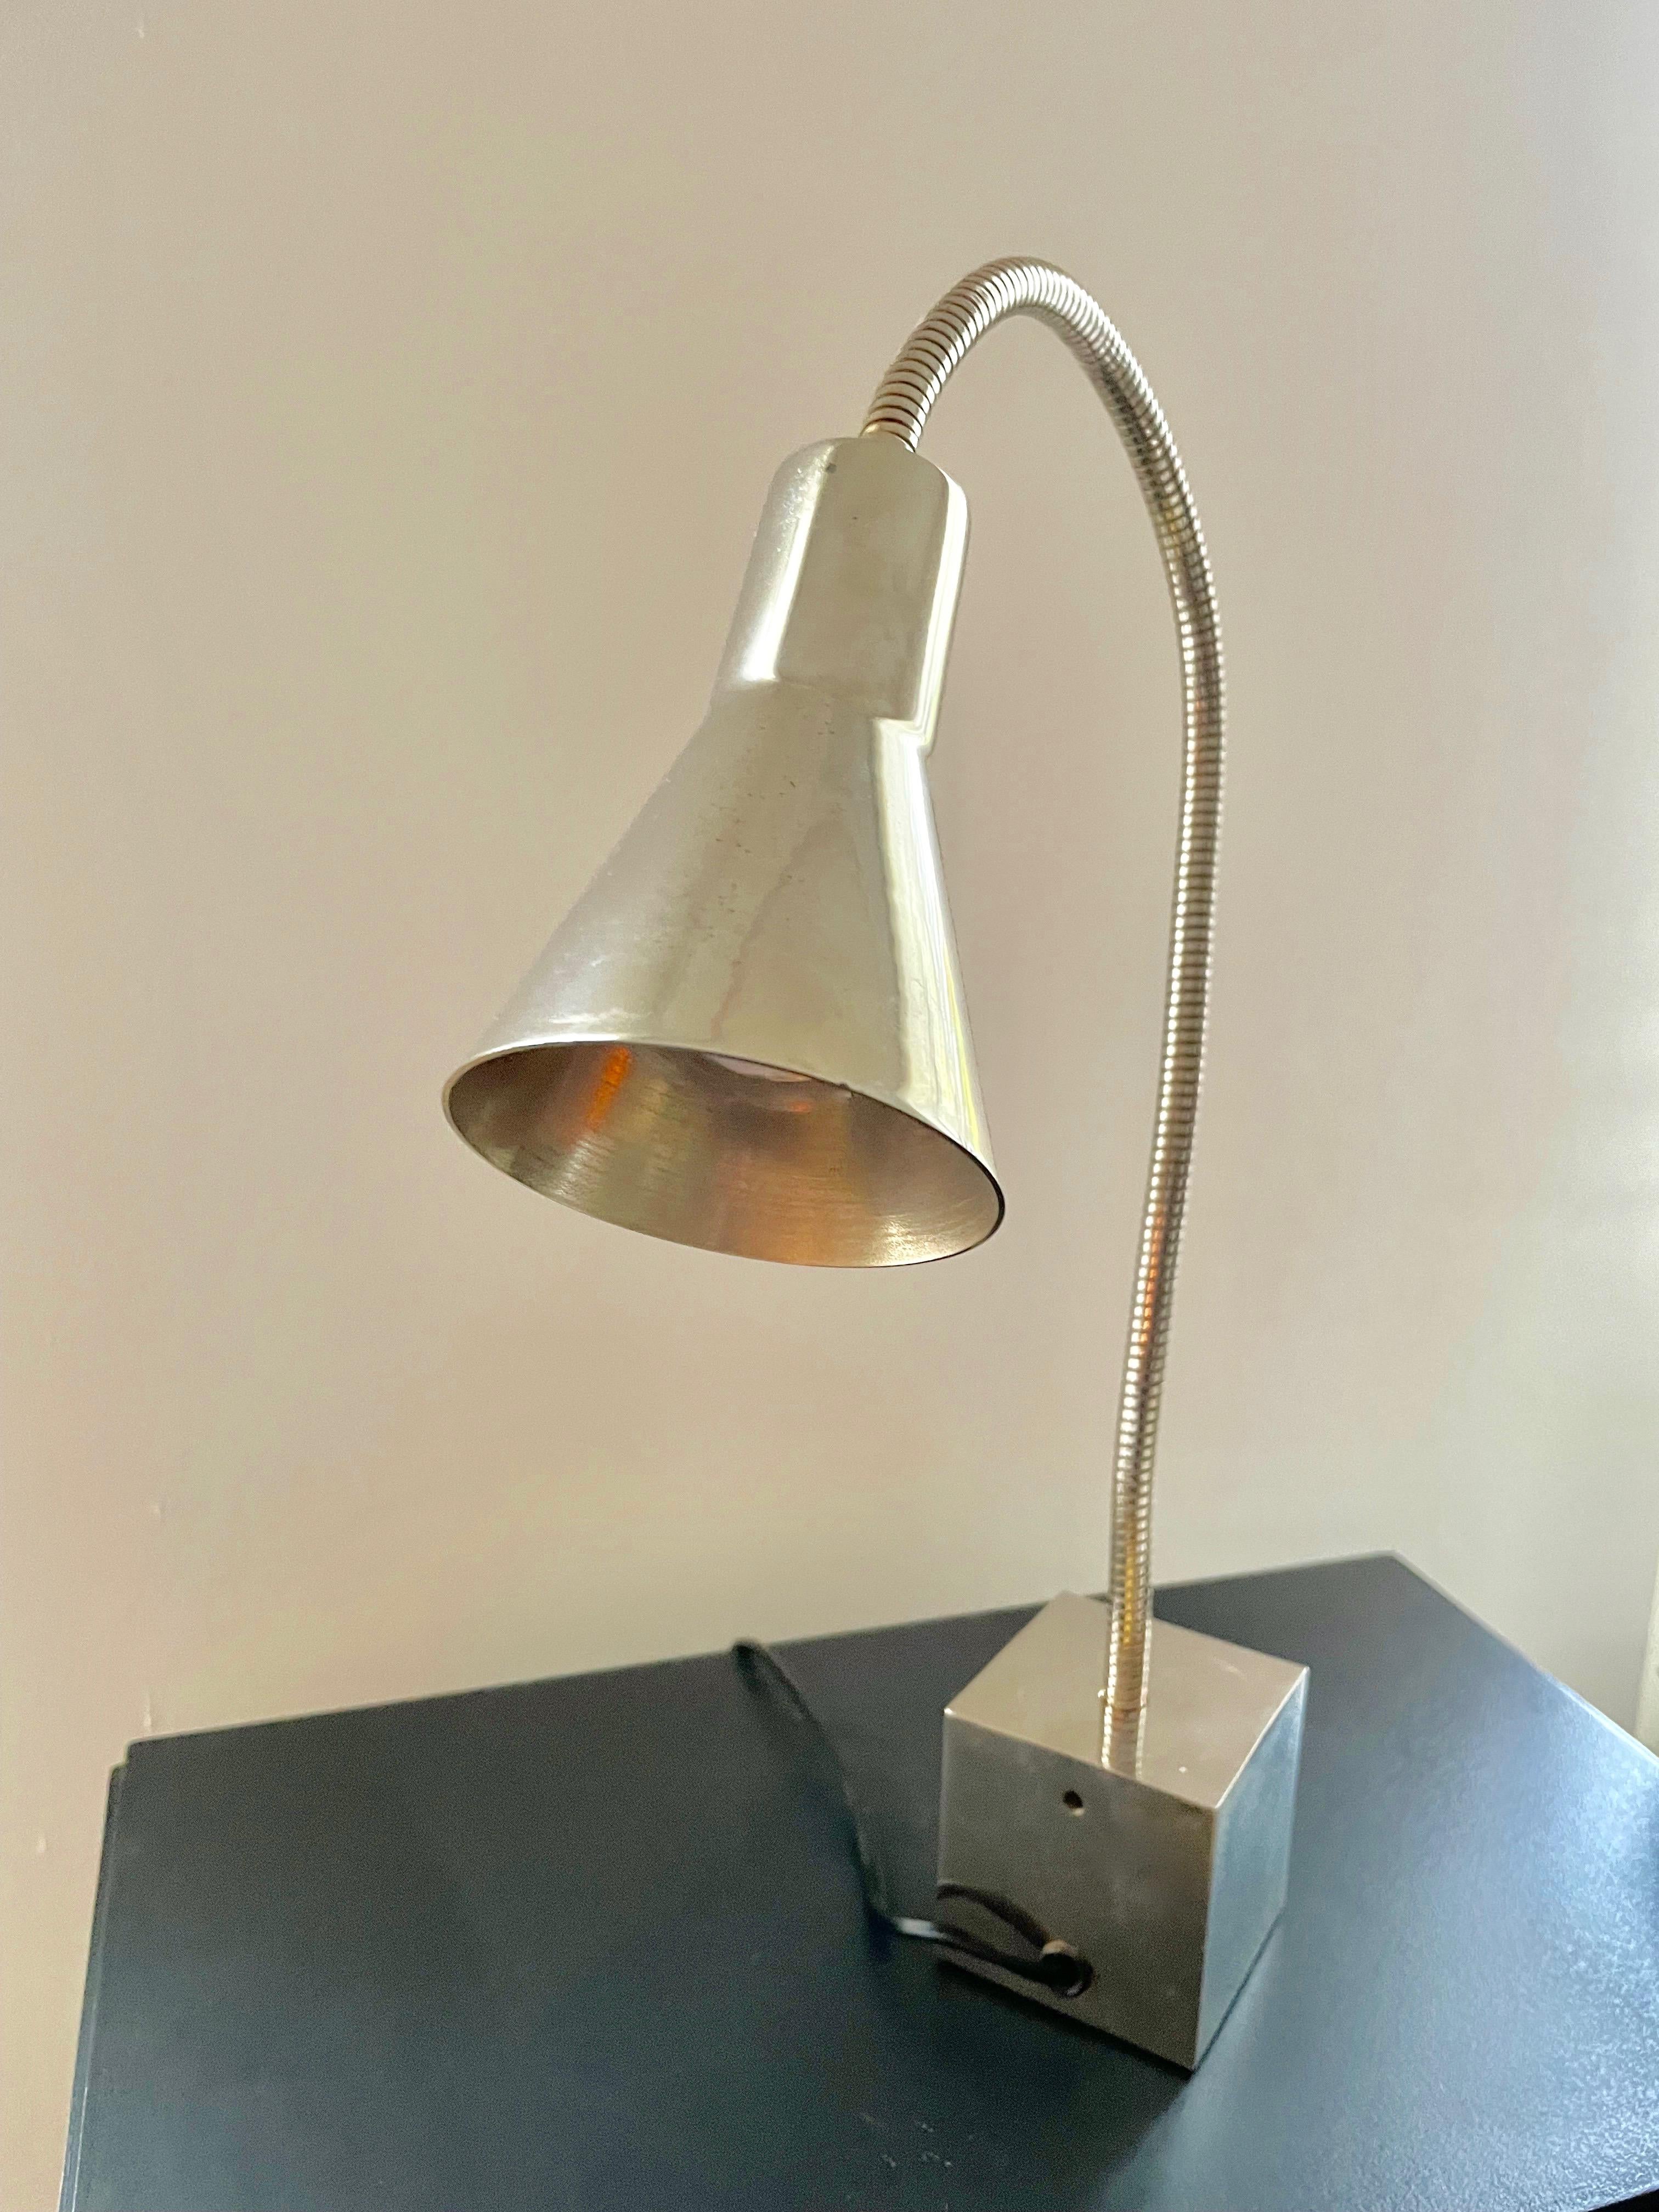 Polished Polish Steel Table Lamp With Flexible Reflector by Michel Boyer, France 1968. For Sale